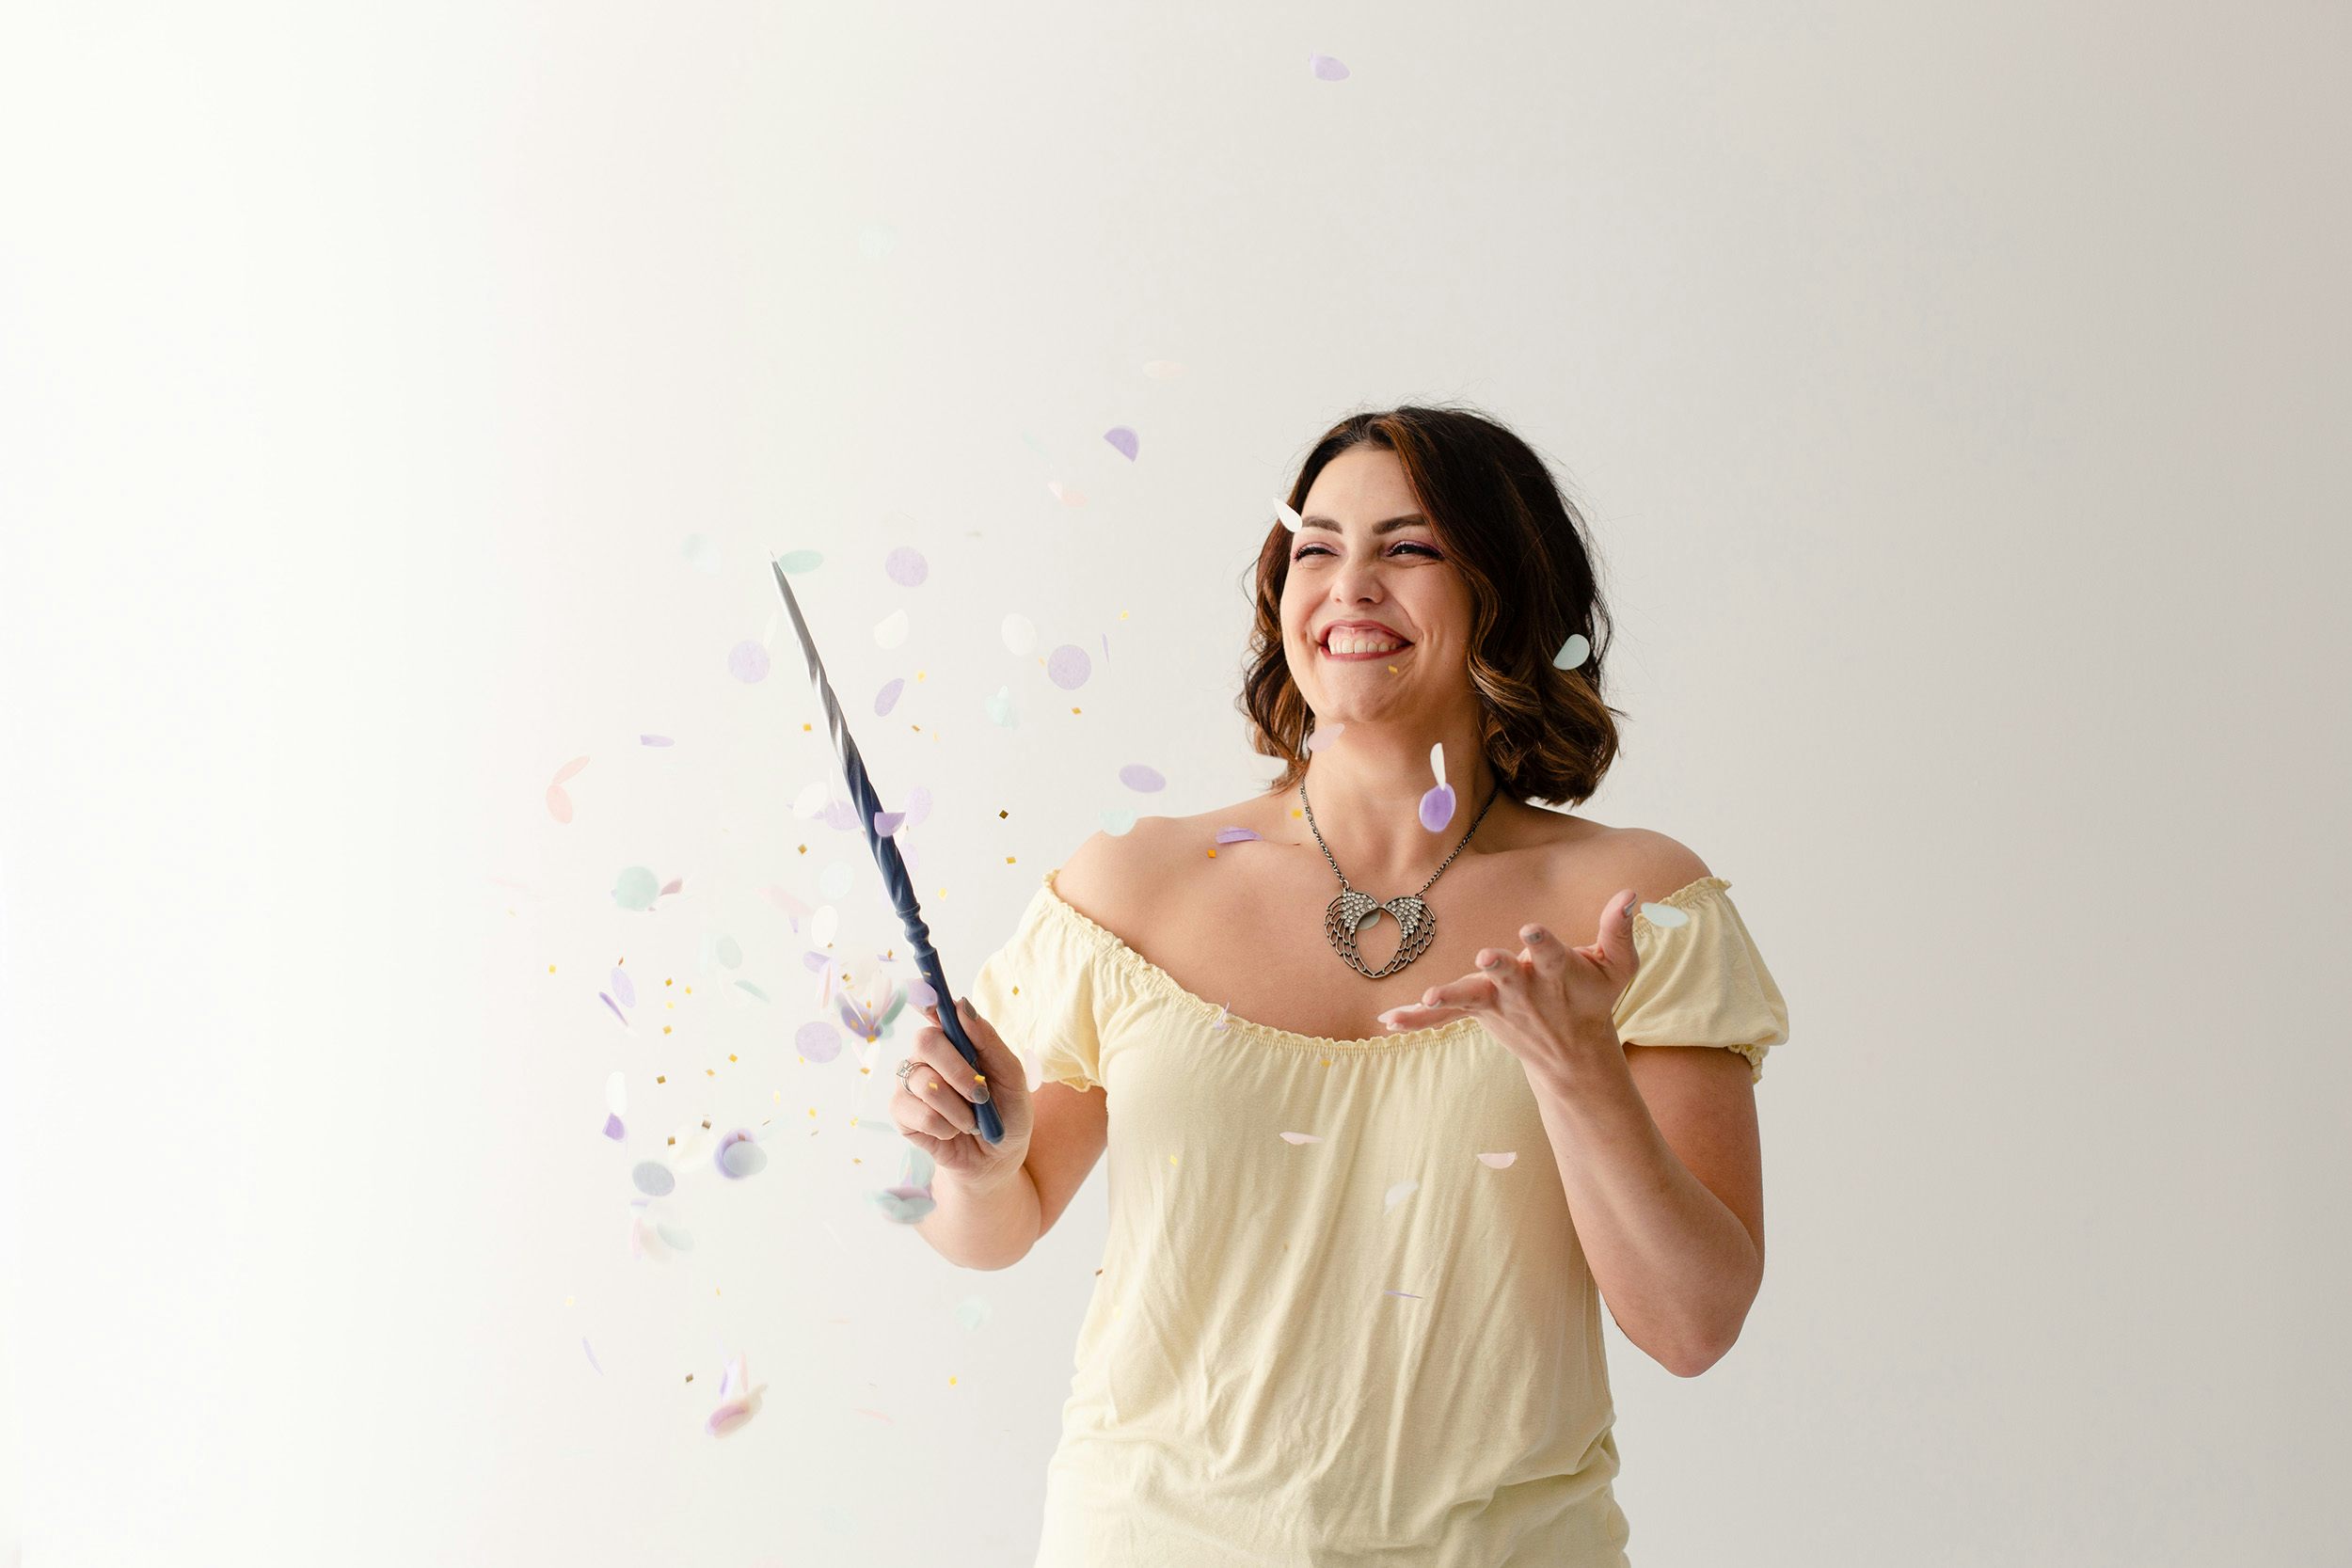 Megan laughing as she waves her magic wand, surrounded by confetti and sparkles